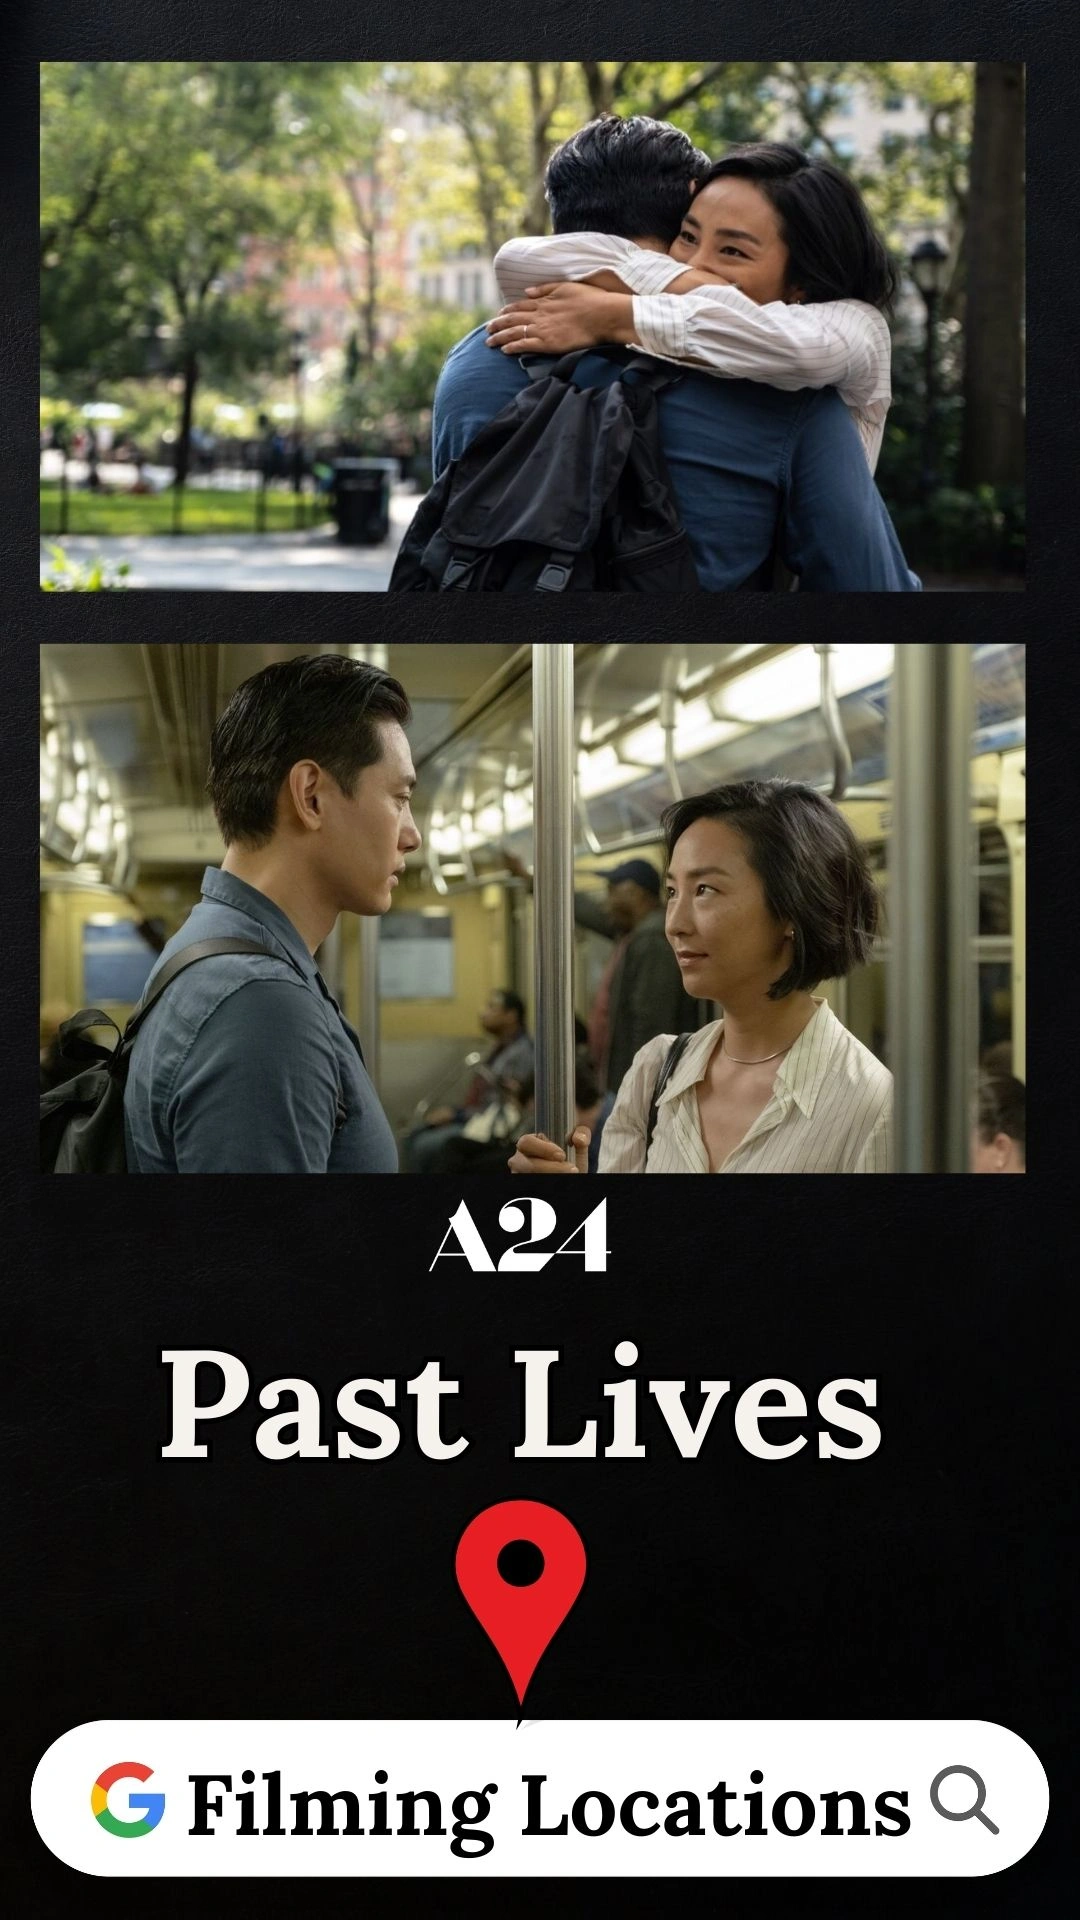 Past Lives Filming Locations